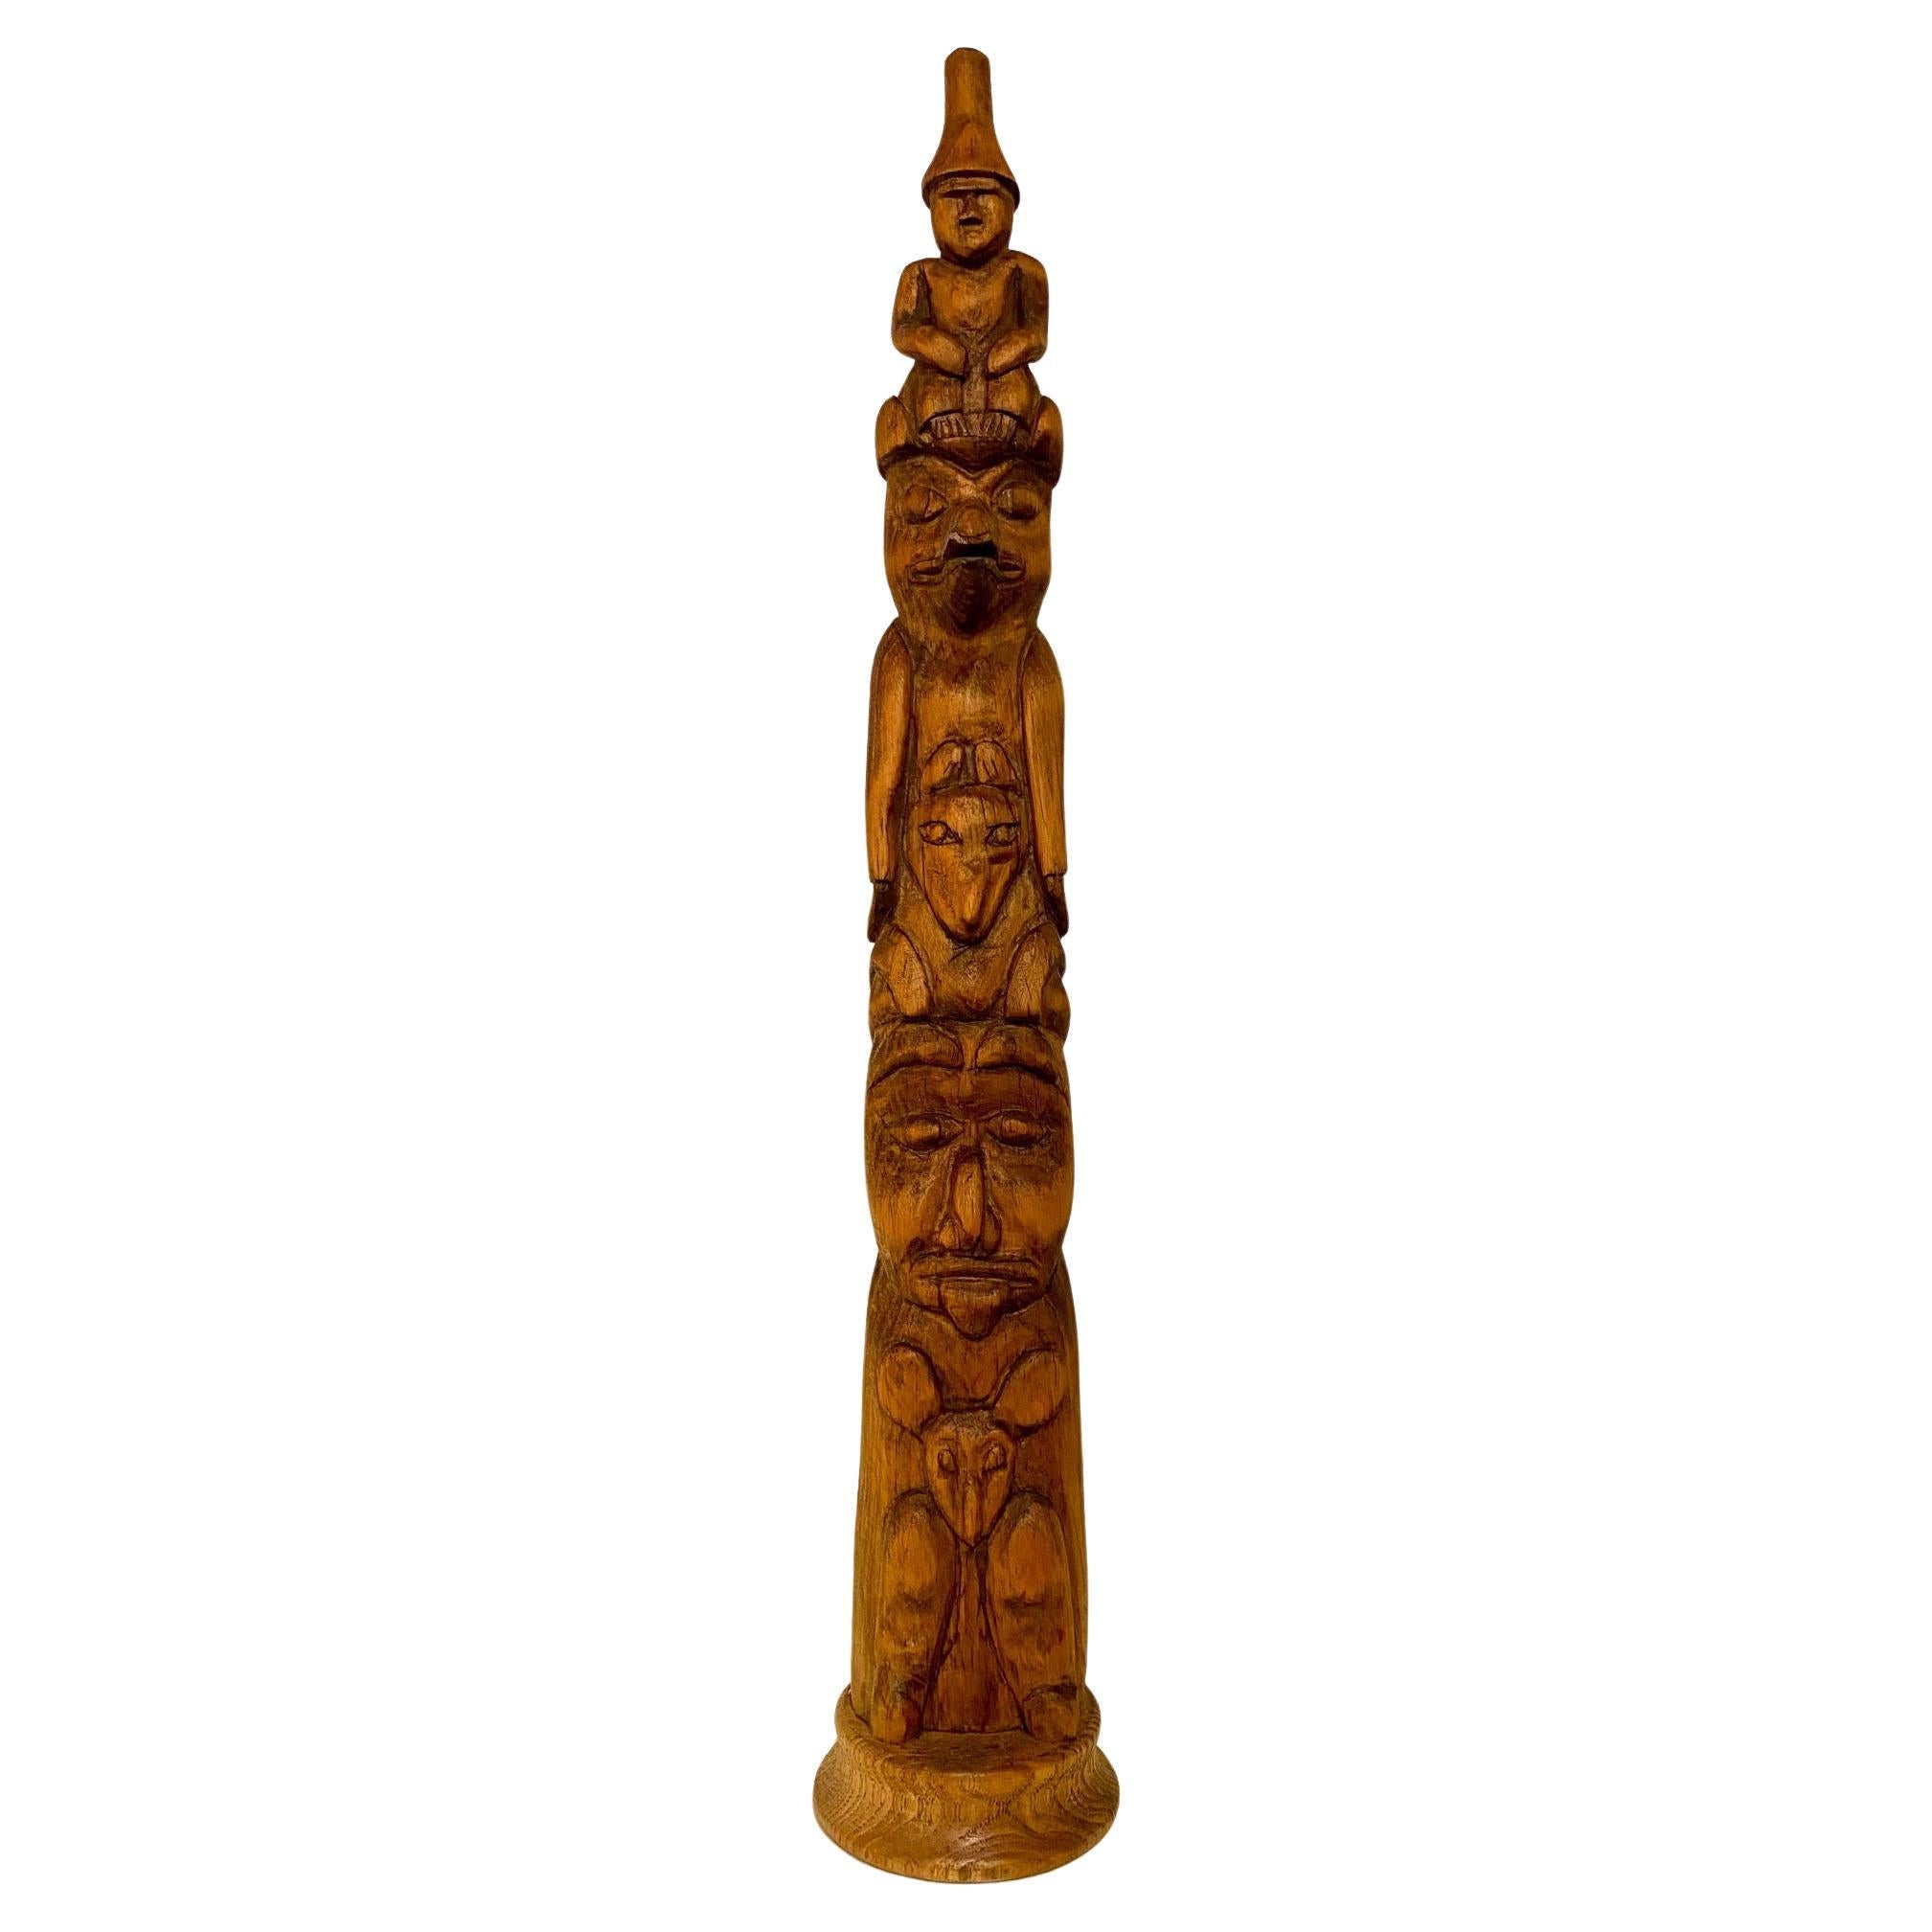 Early 20th Century Pacific Northwest Coast Carved Cedar TOTEM Pole